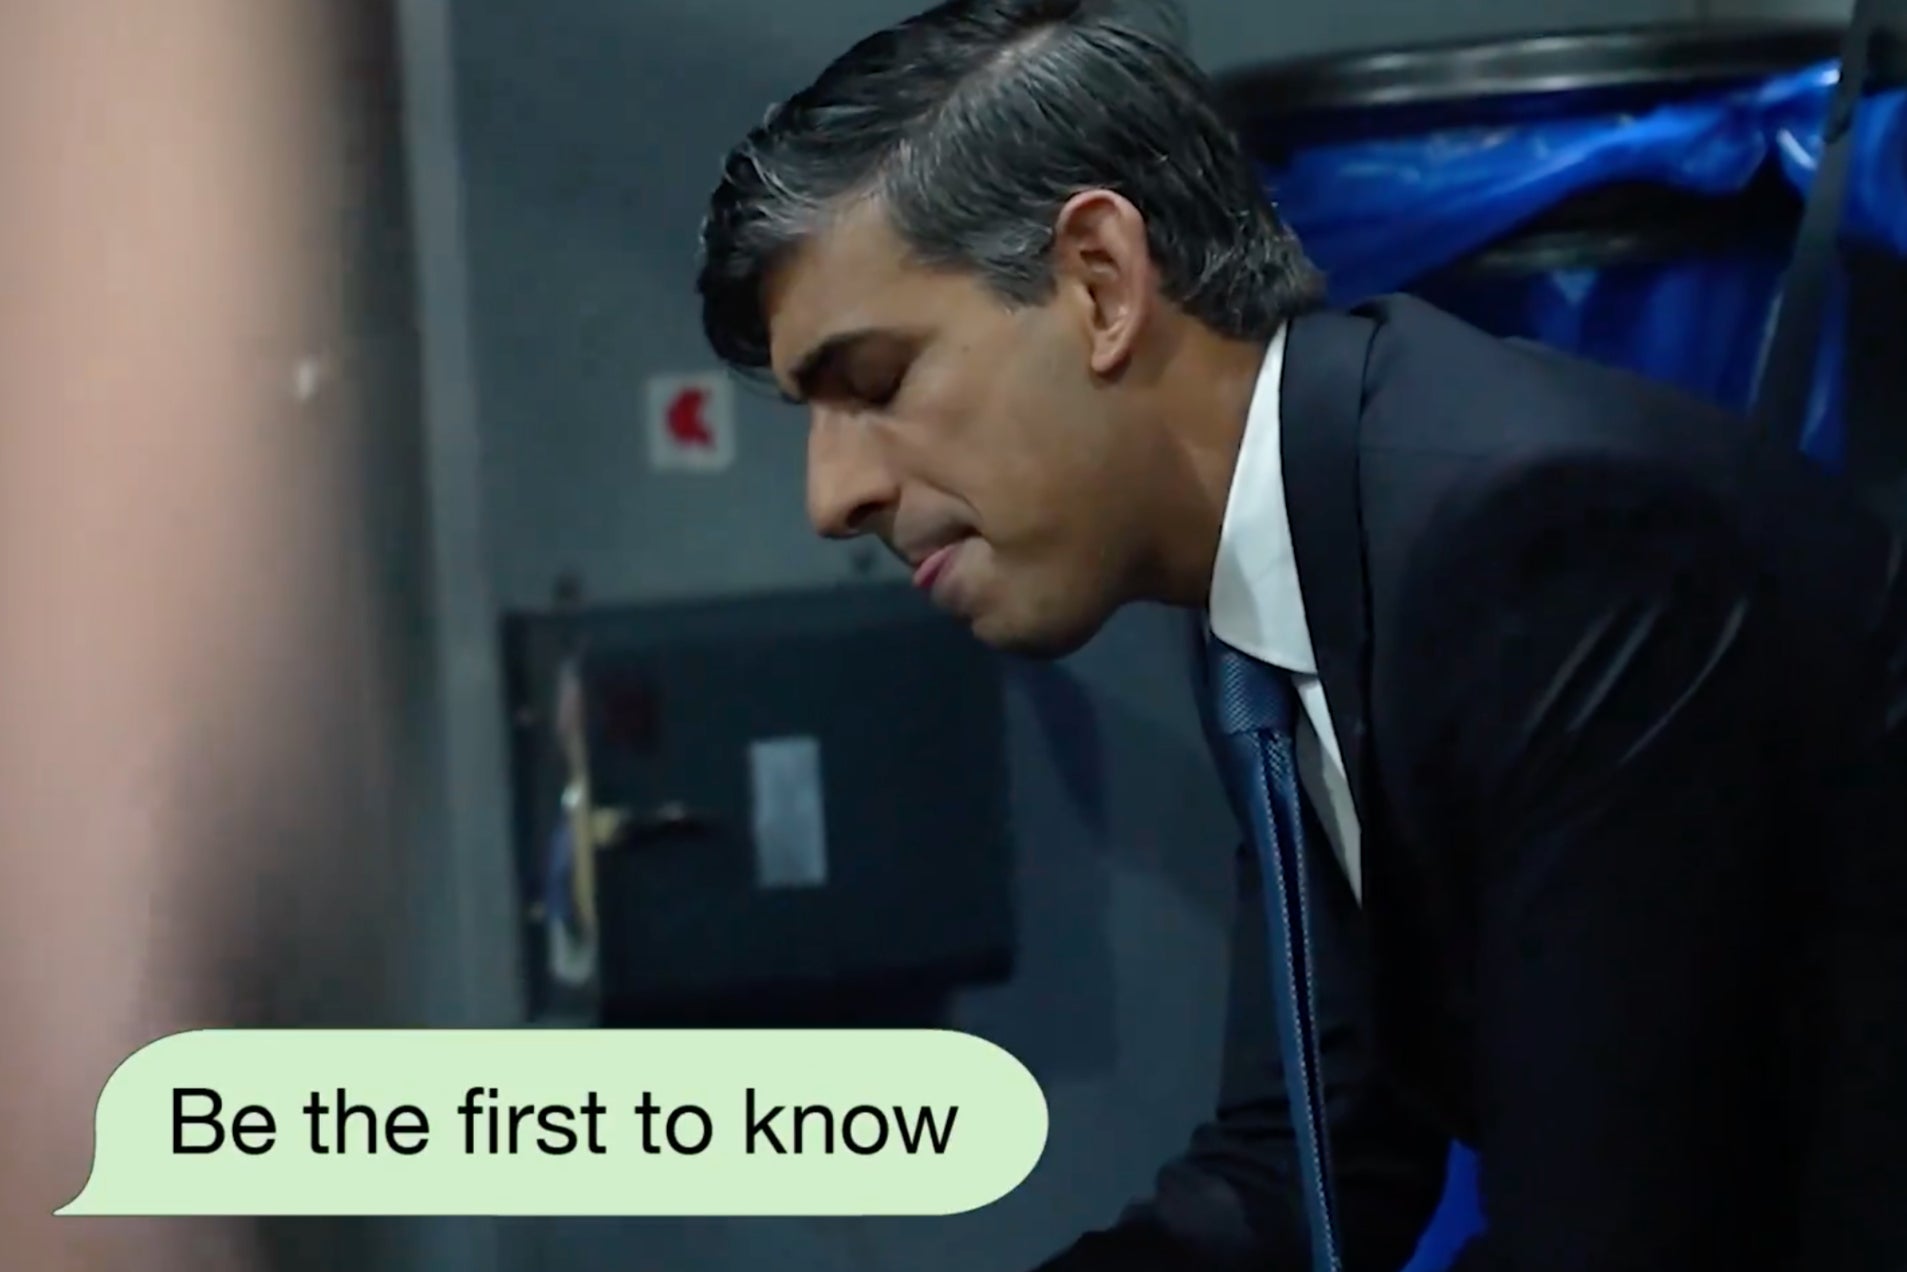 A still from the glossy promotional video advertising Rishi Sunak’s new ‘DM from the PM’ service